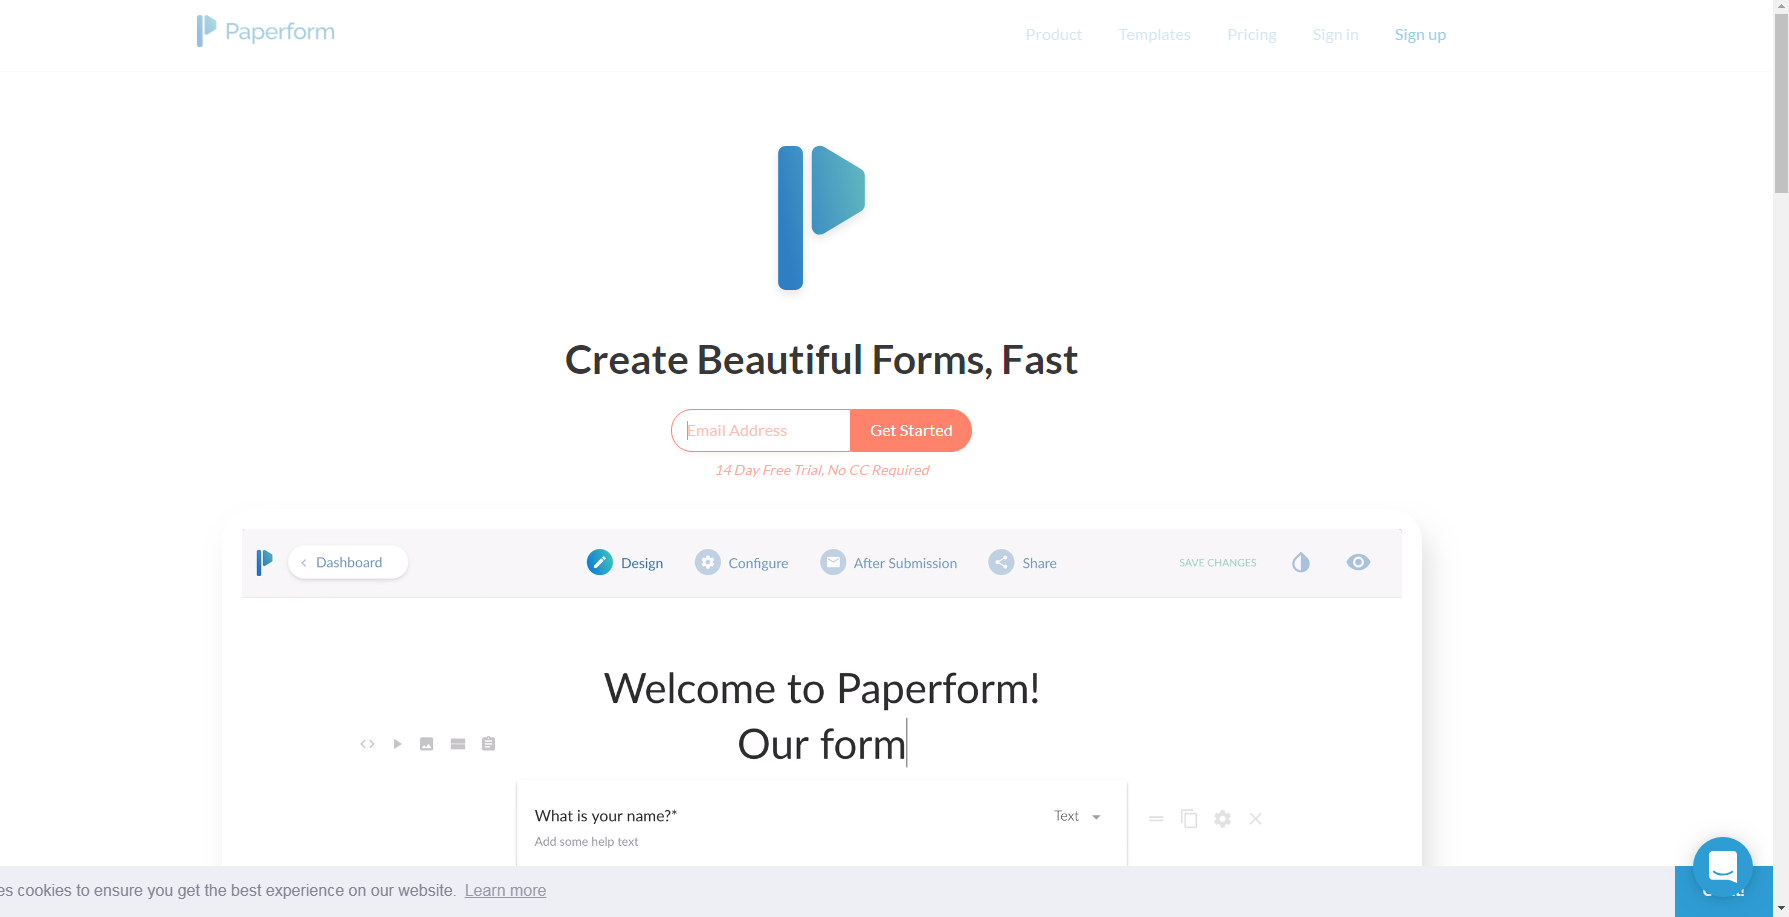 Paperform.co